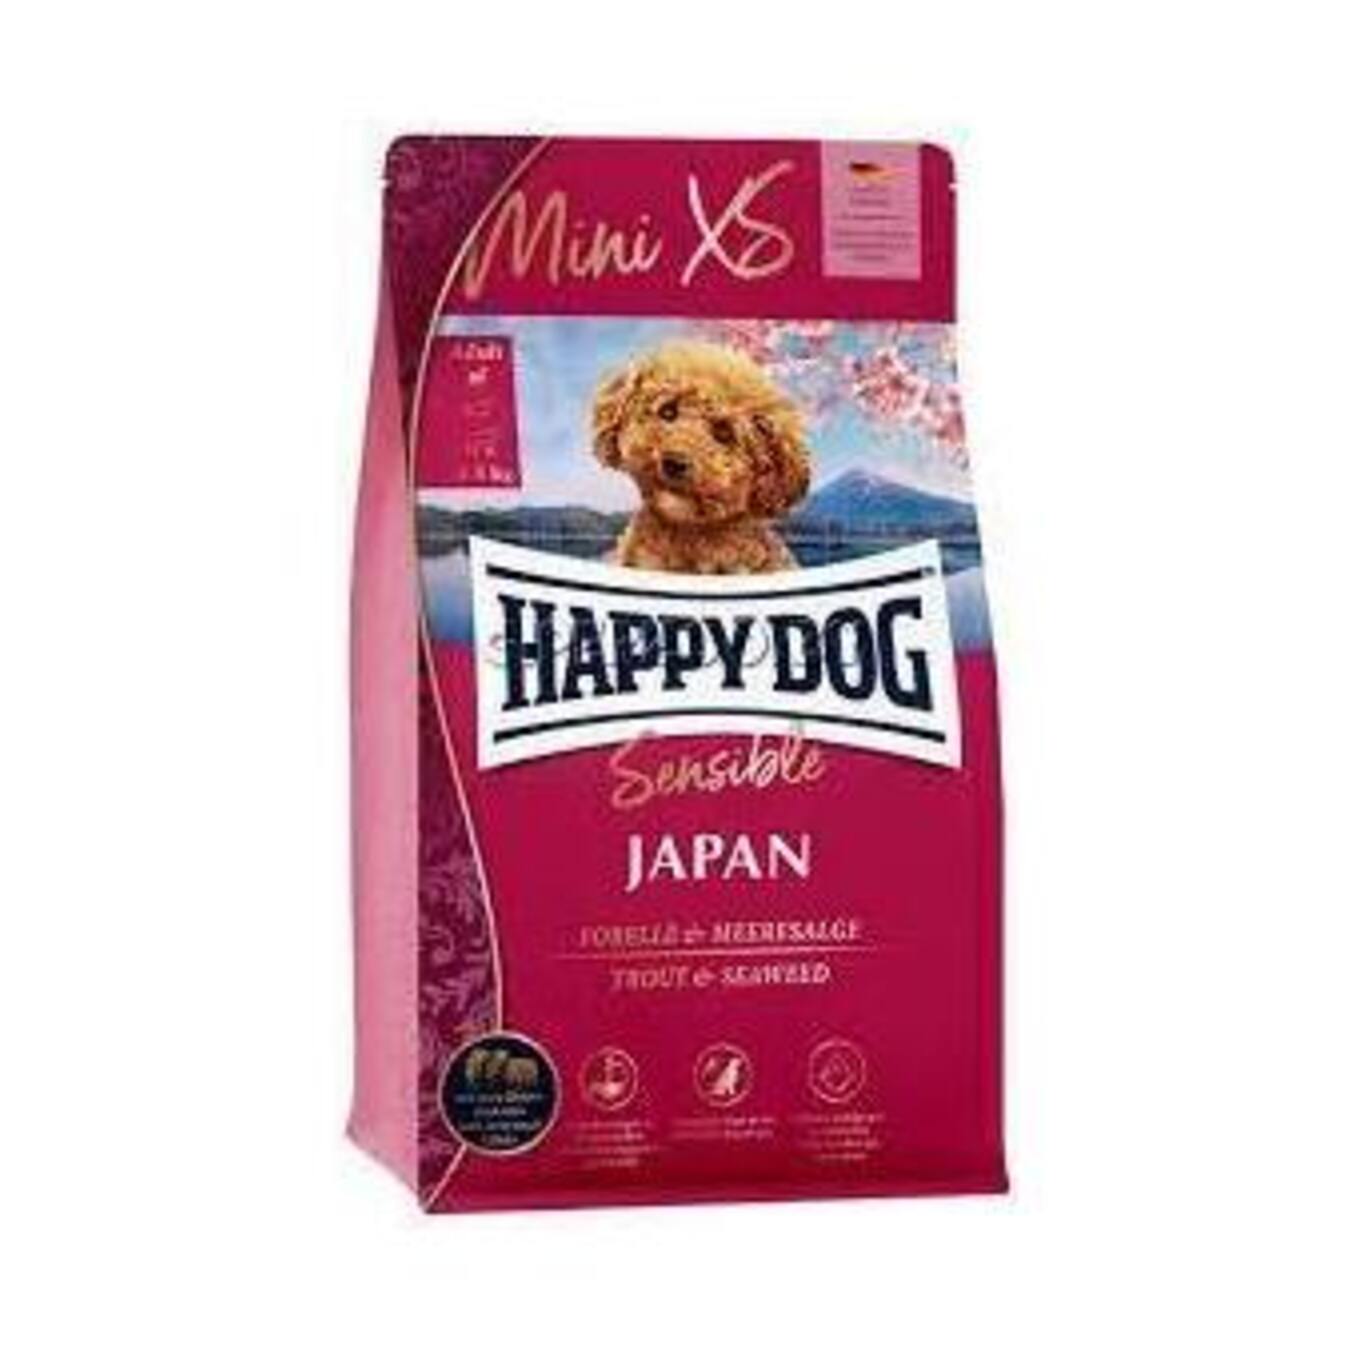 Food for dogs up to 5 kg Happy Dog Mini XS Japan with chicken, trout and seaweed dry 300g